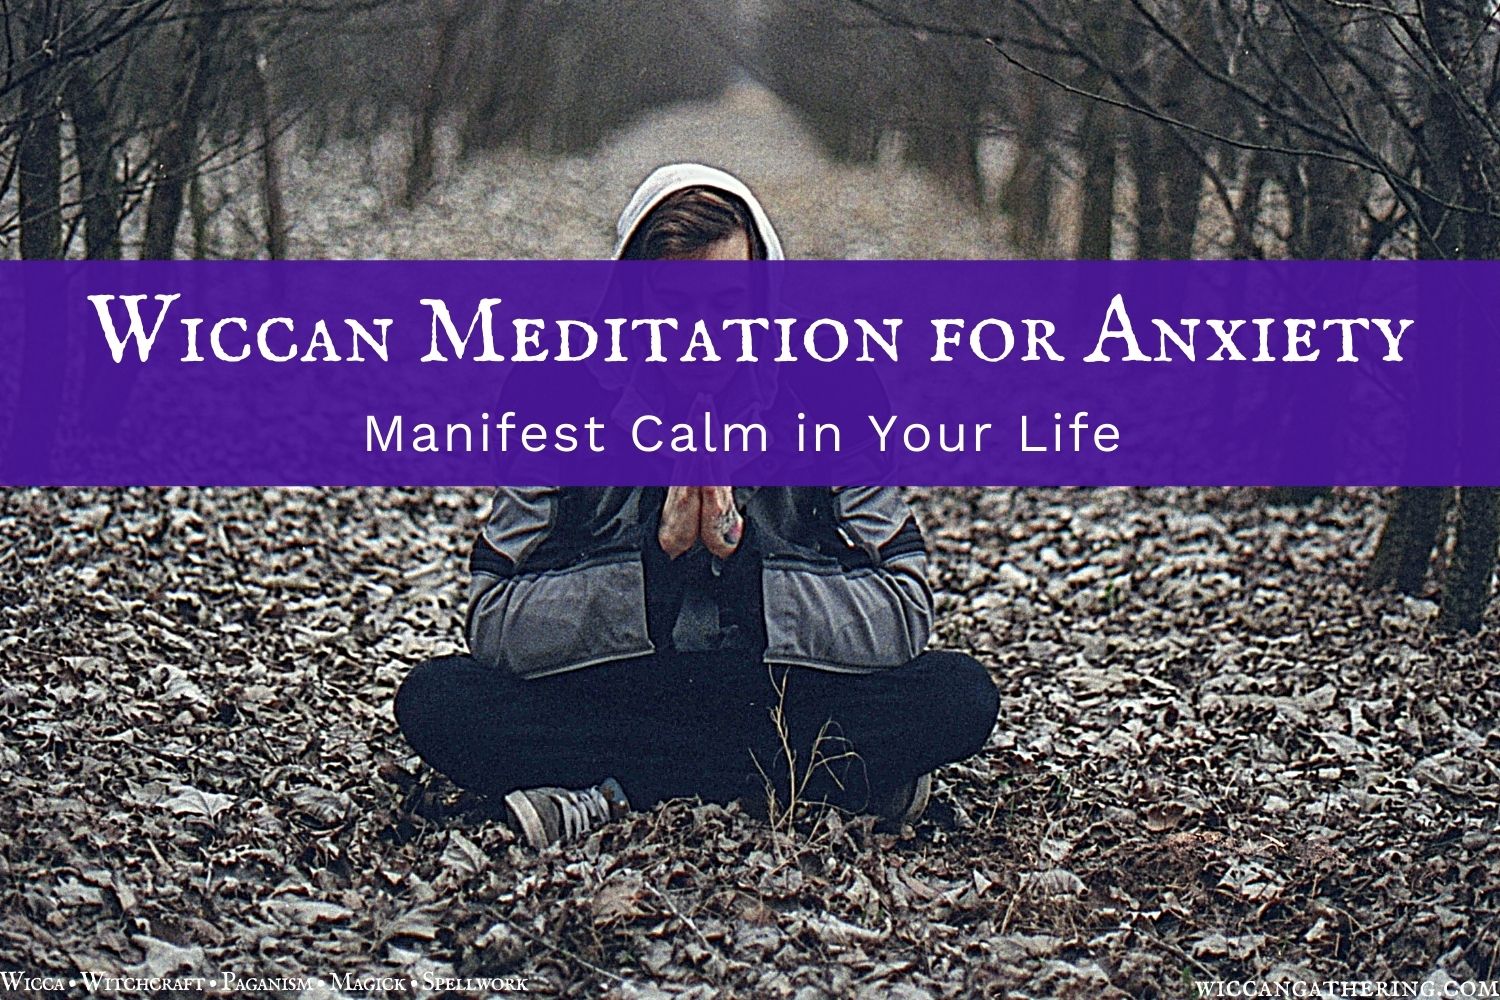 Wiccan Meditation For Anxiety